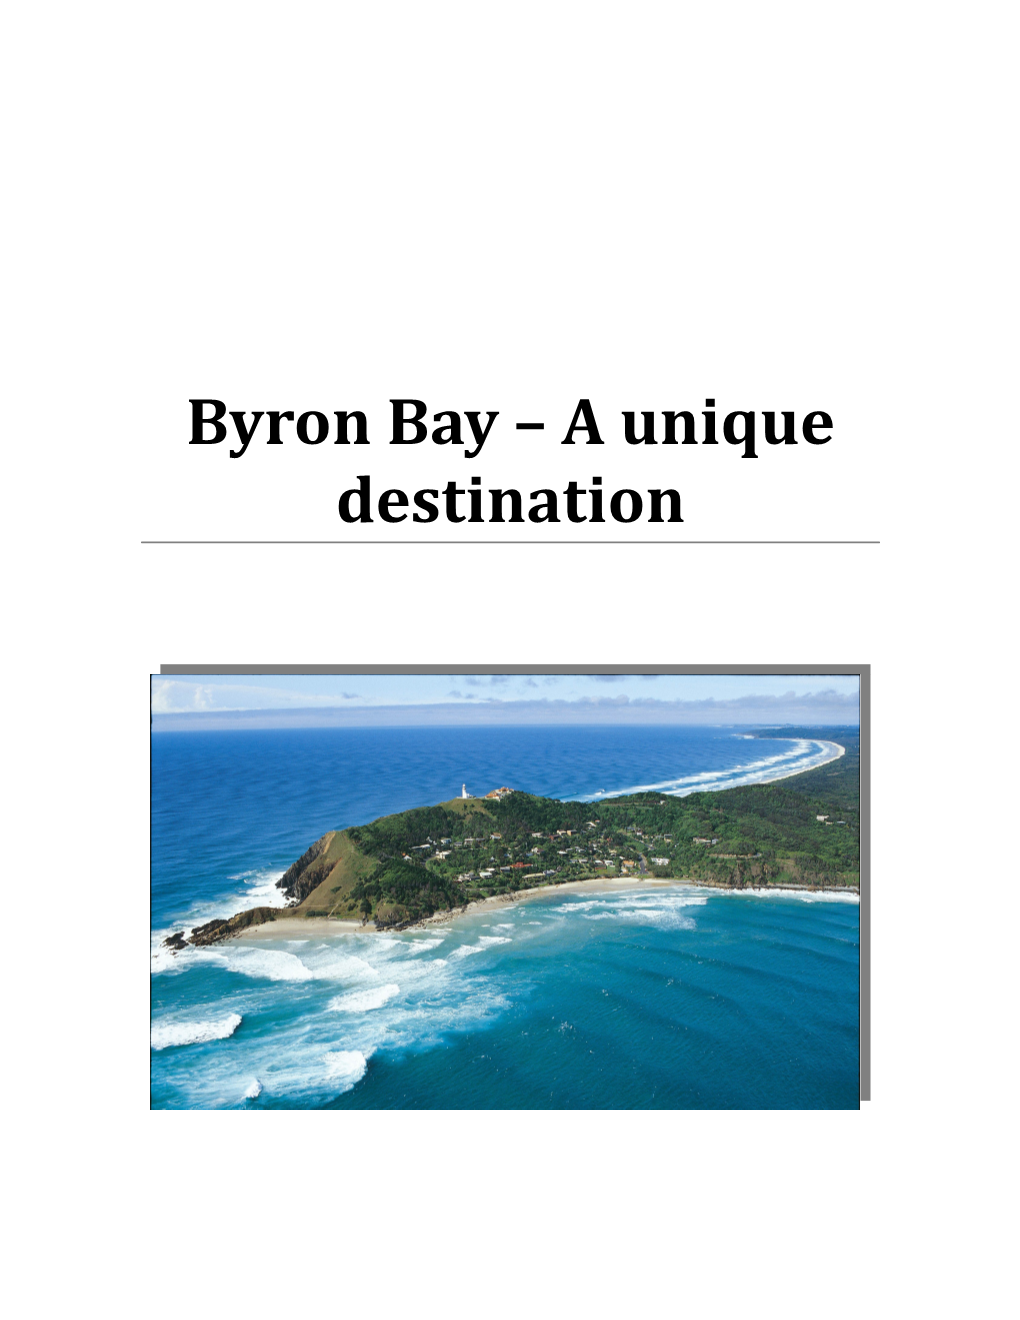 An Approach to Byron Bay